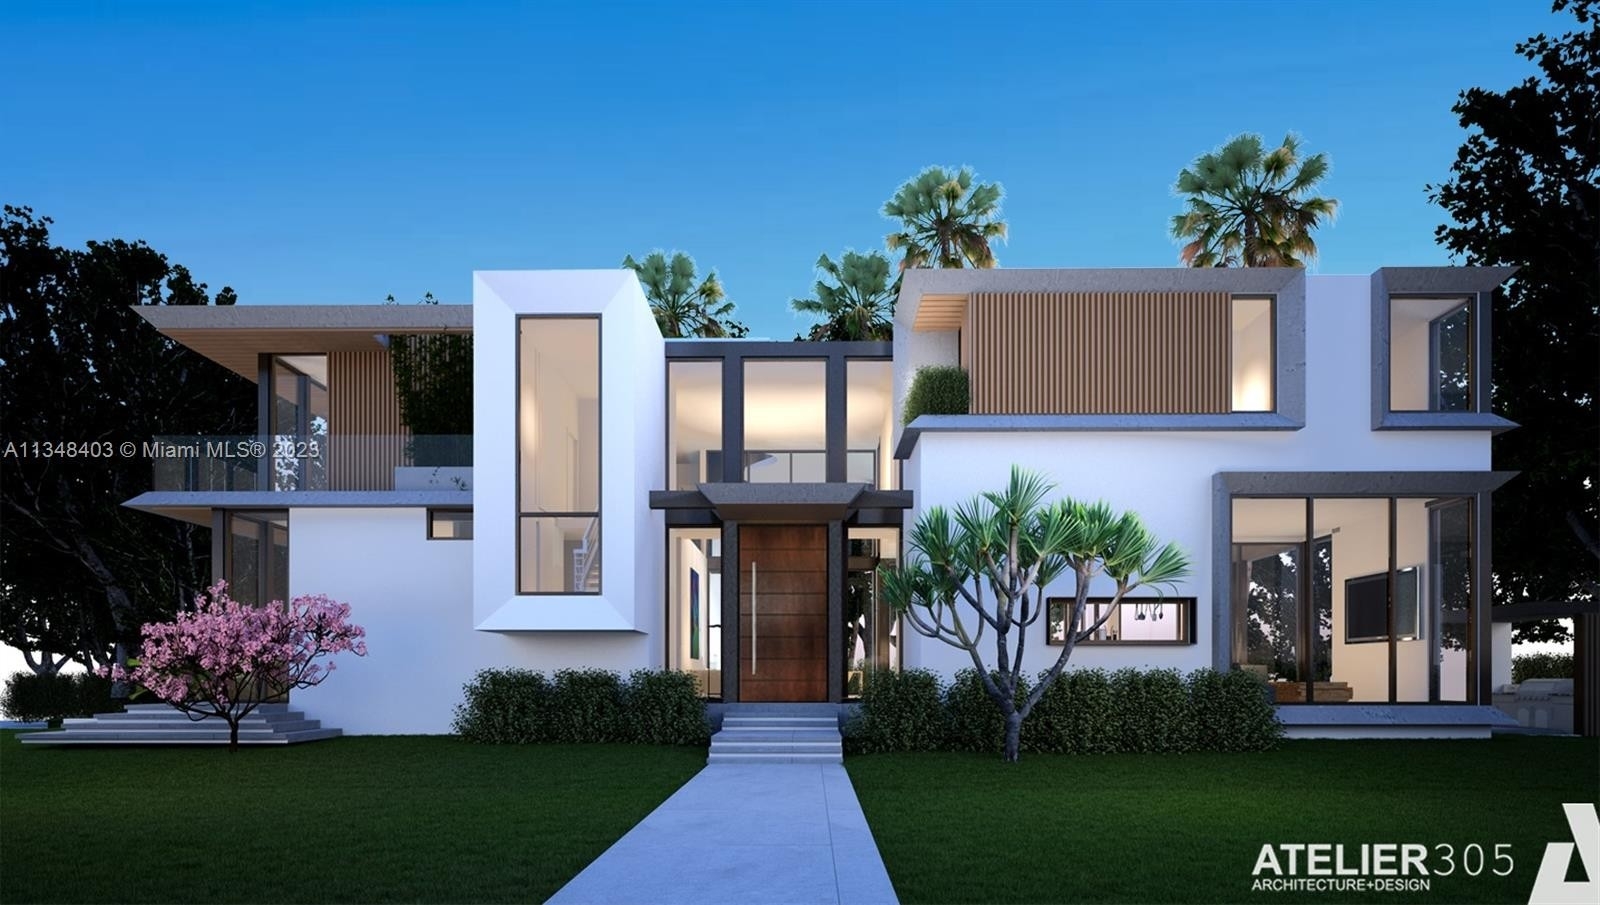 Single Family Home for Sale at Hibiscus Island, Miami Beach, FL 33139